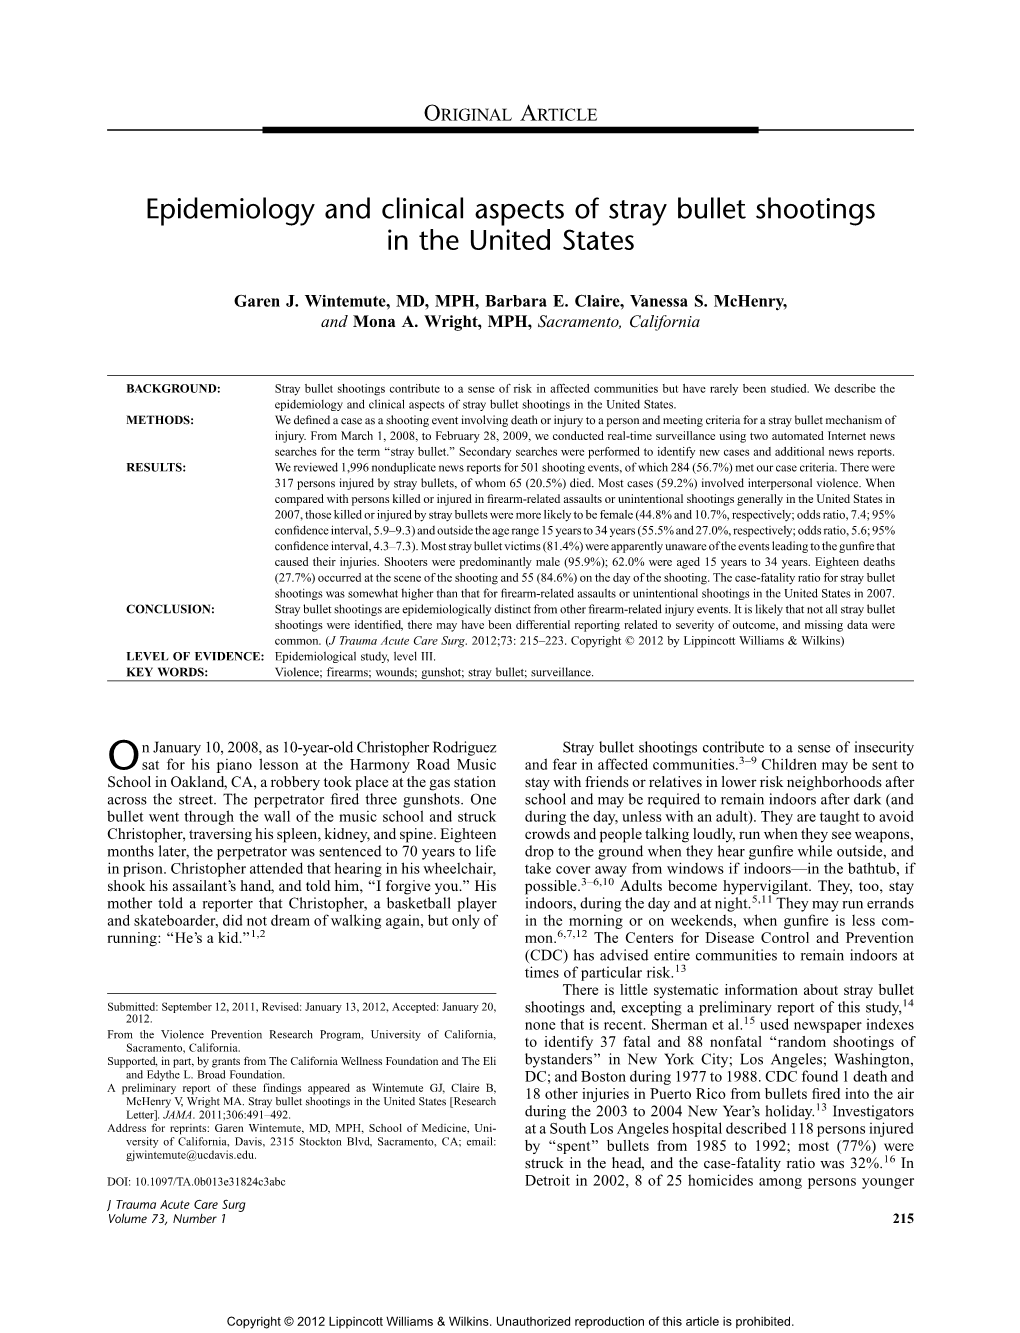 Epidemiology and Clinical Aspects of Stray Bullet Shootings in the United States